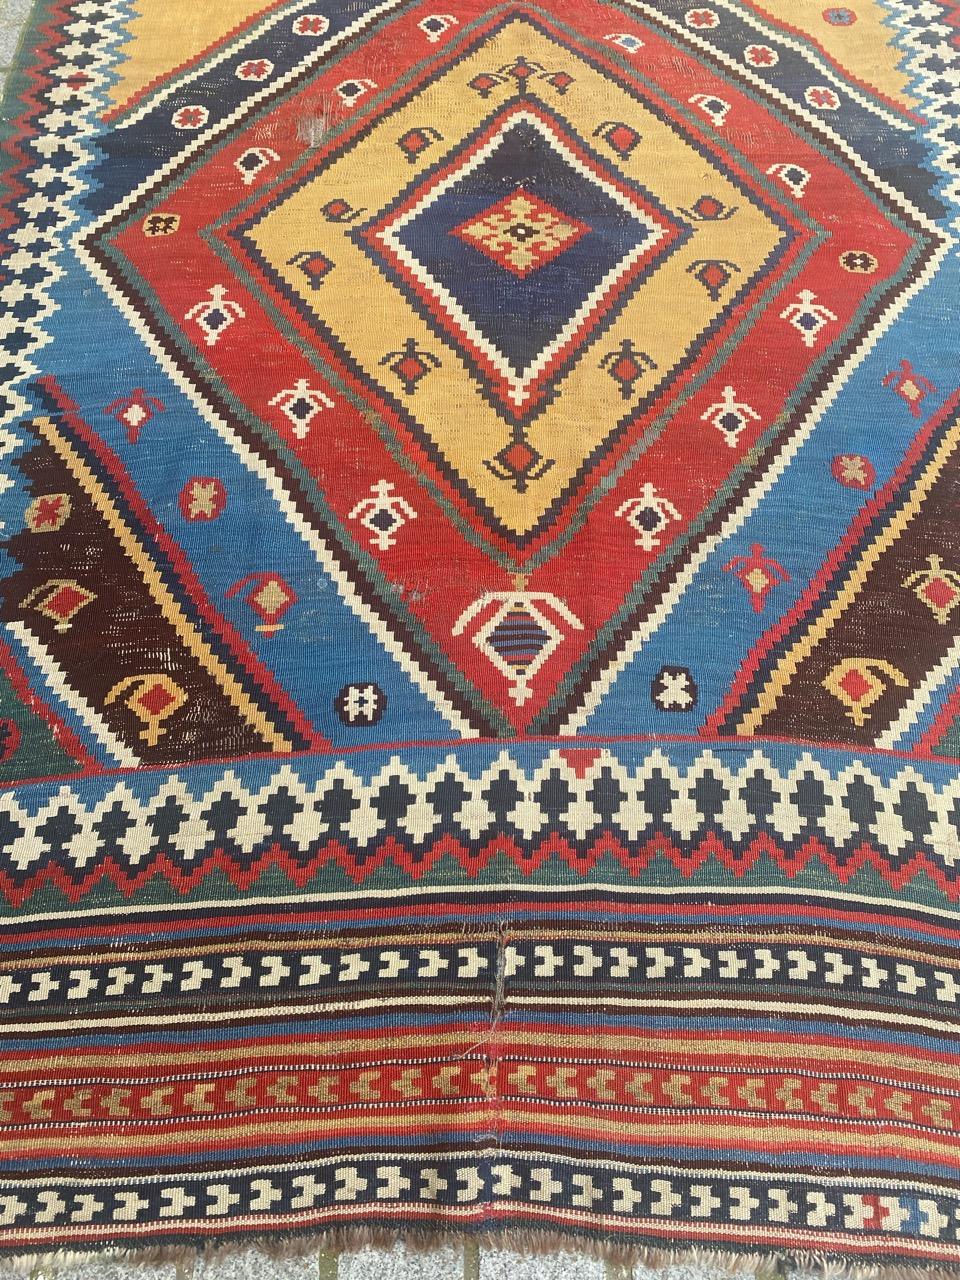 Very beautiful late 19th century tribal qashqai Kilim with beautiful geometrical design and nice natural colors, entirely hand woven with wool on wool foundation.